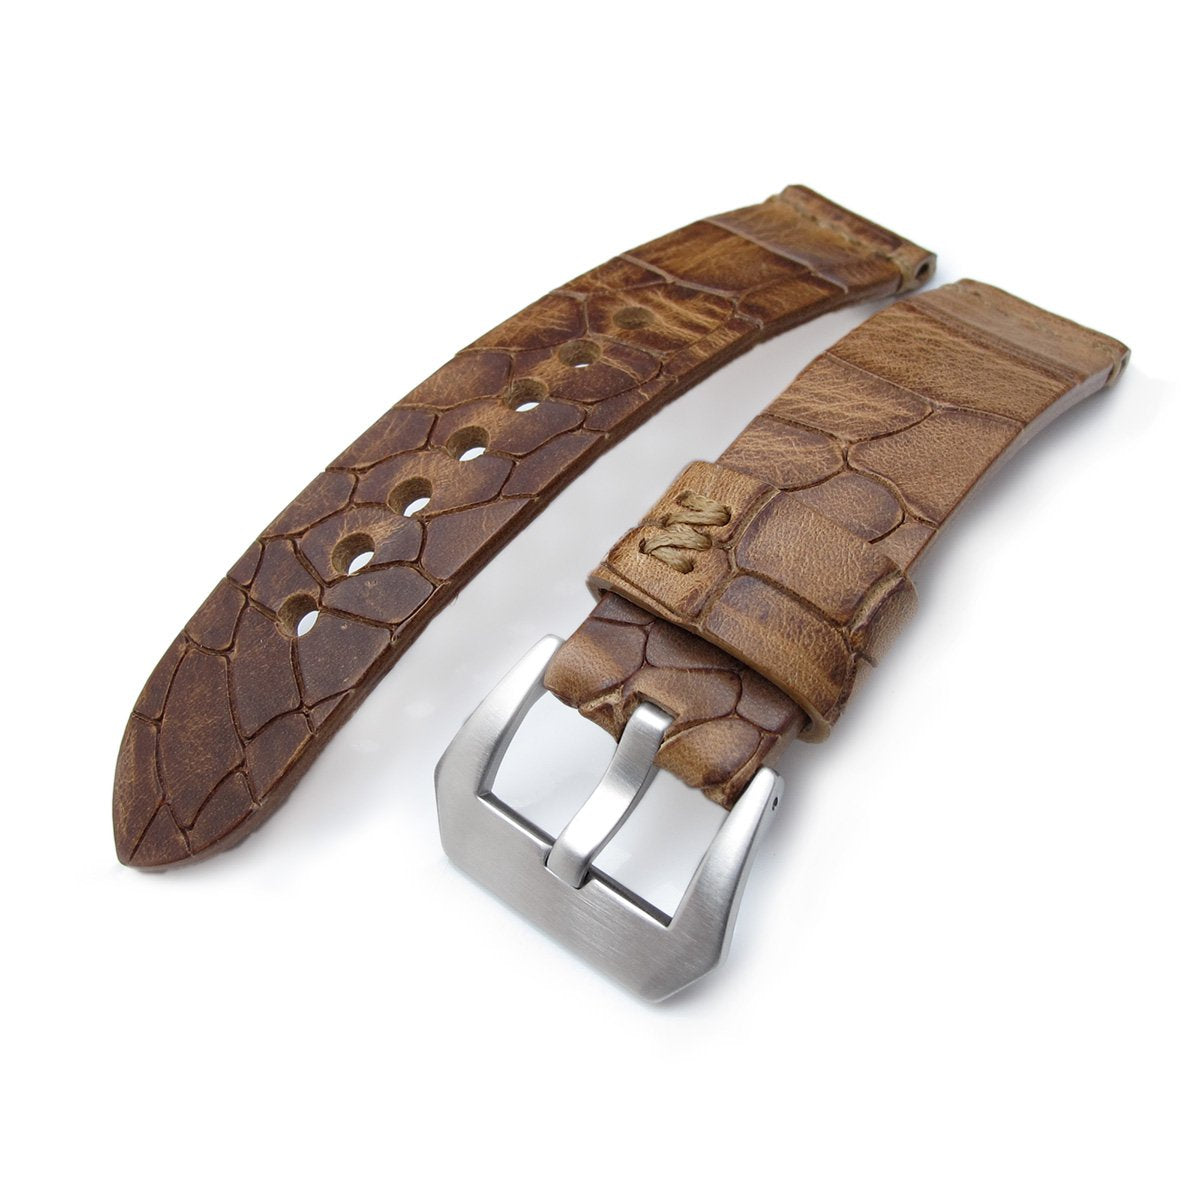 MiLTAT Zizz Collection 22mm Cracked Croco Middle Brown Watch Strap Brown Stitching Strapcode Watch Bands